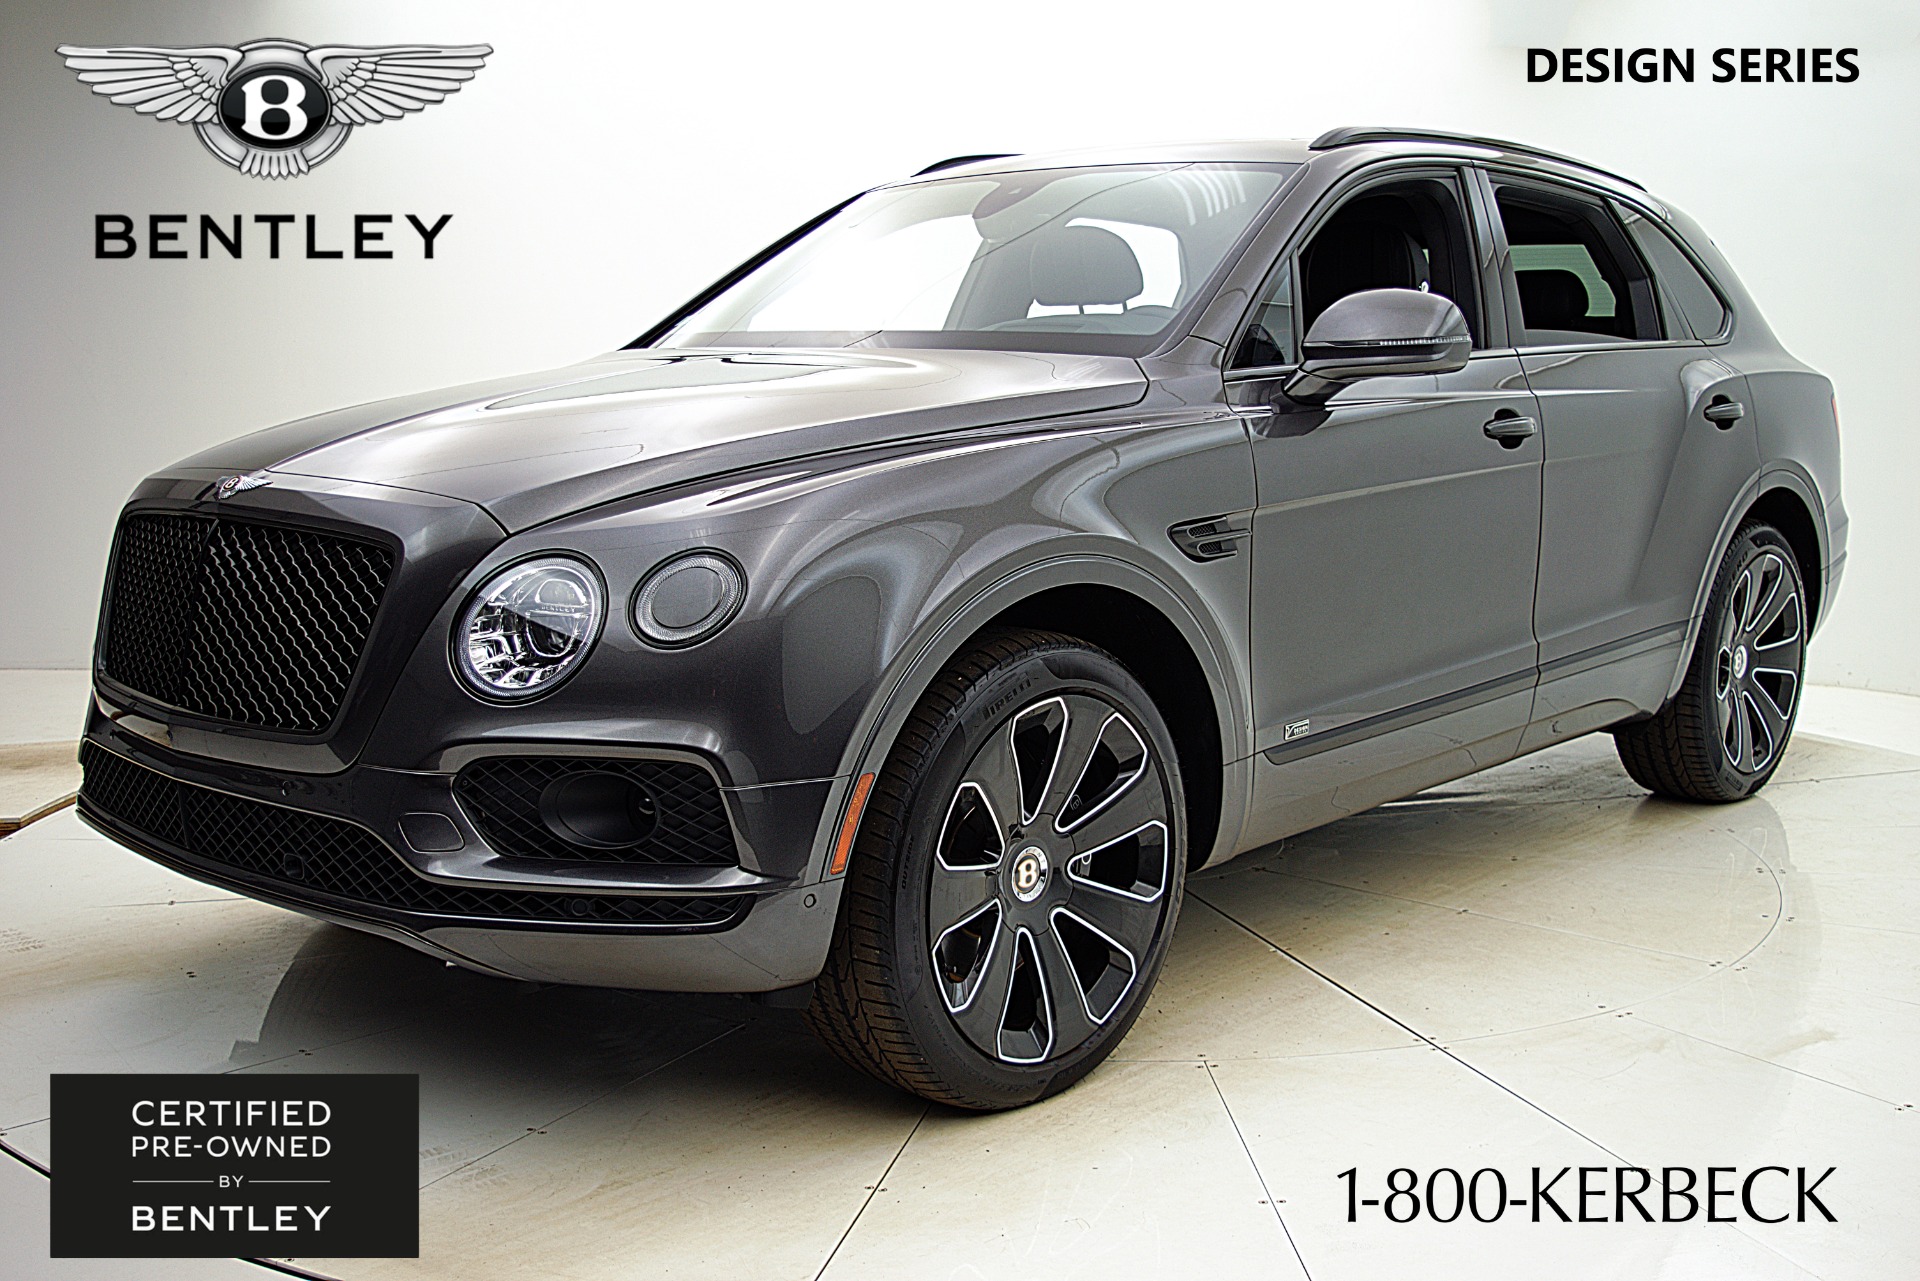 Used 2020 Bentley Bentayga V8 Design Series / LEASE OPTIONS AVAILABLE for sale $149,000 at Bentley Palmyra N.J. in Palmyra NJ 08065 2